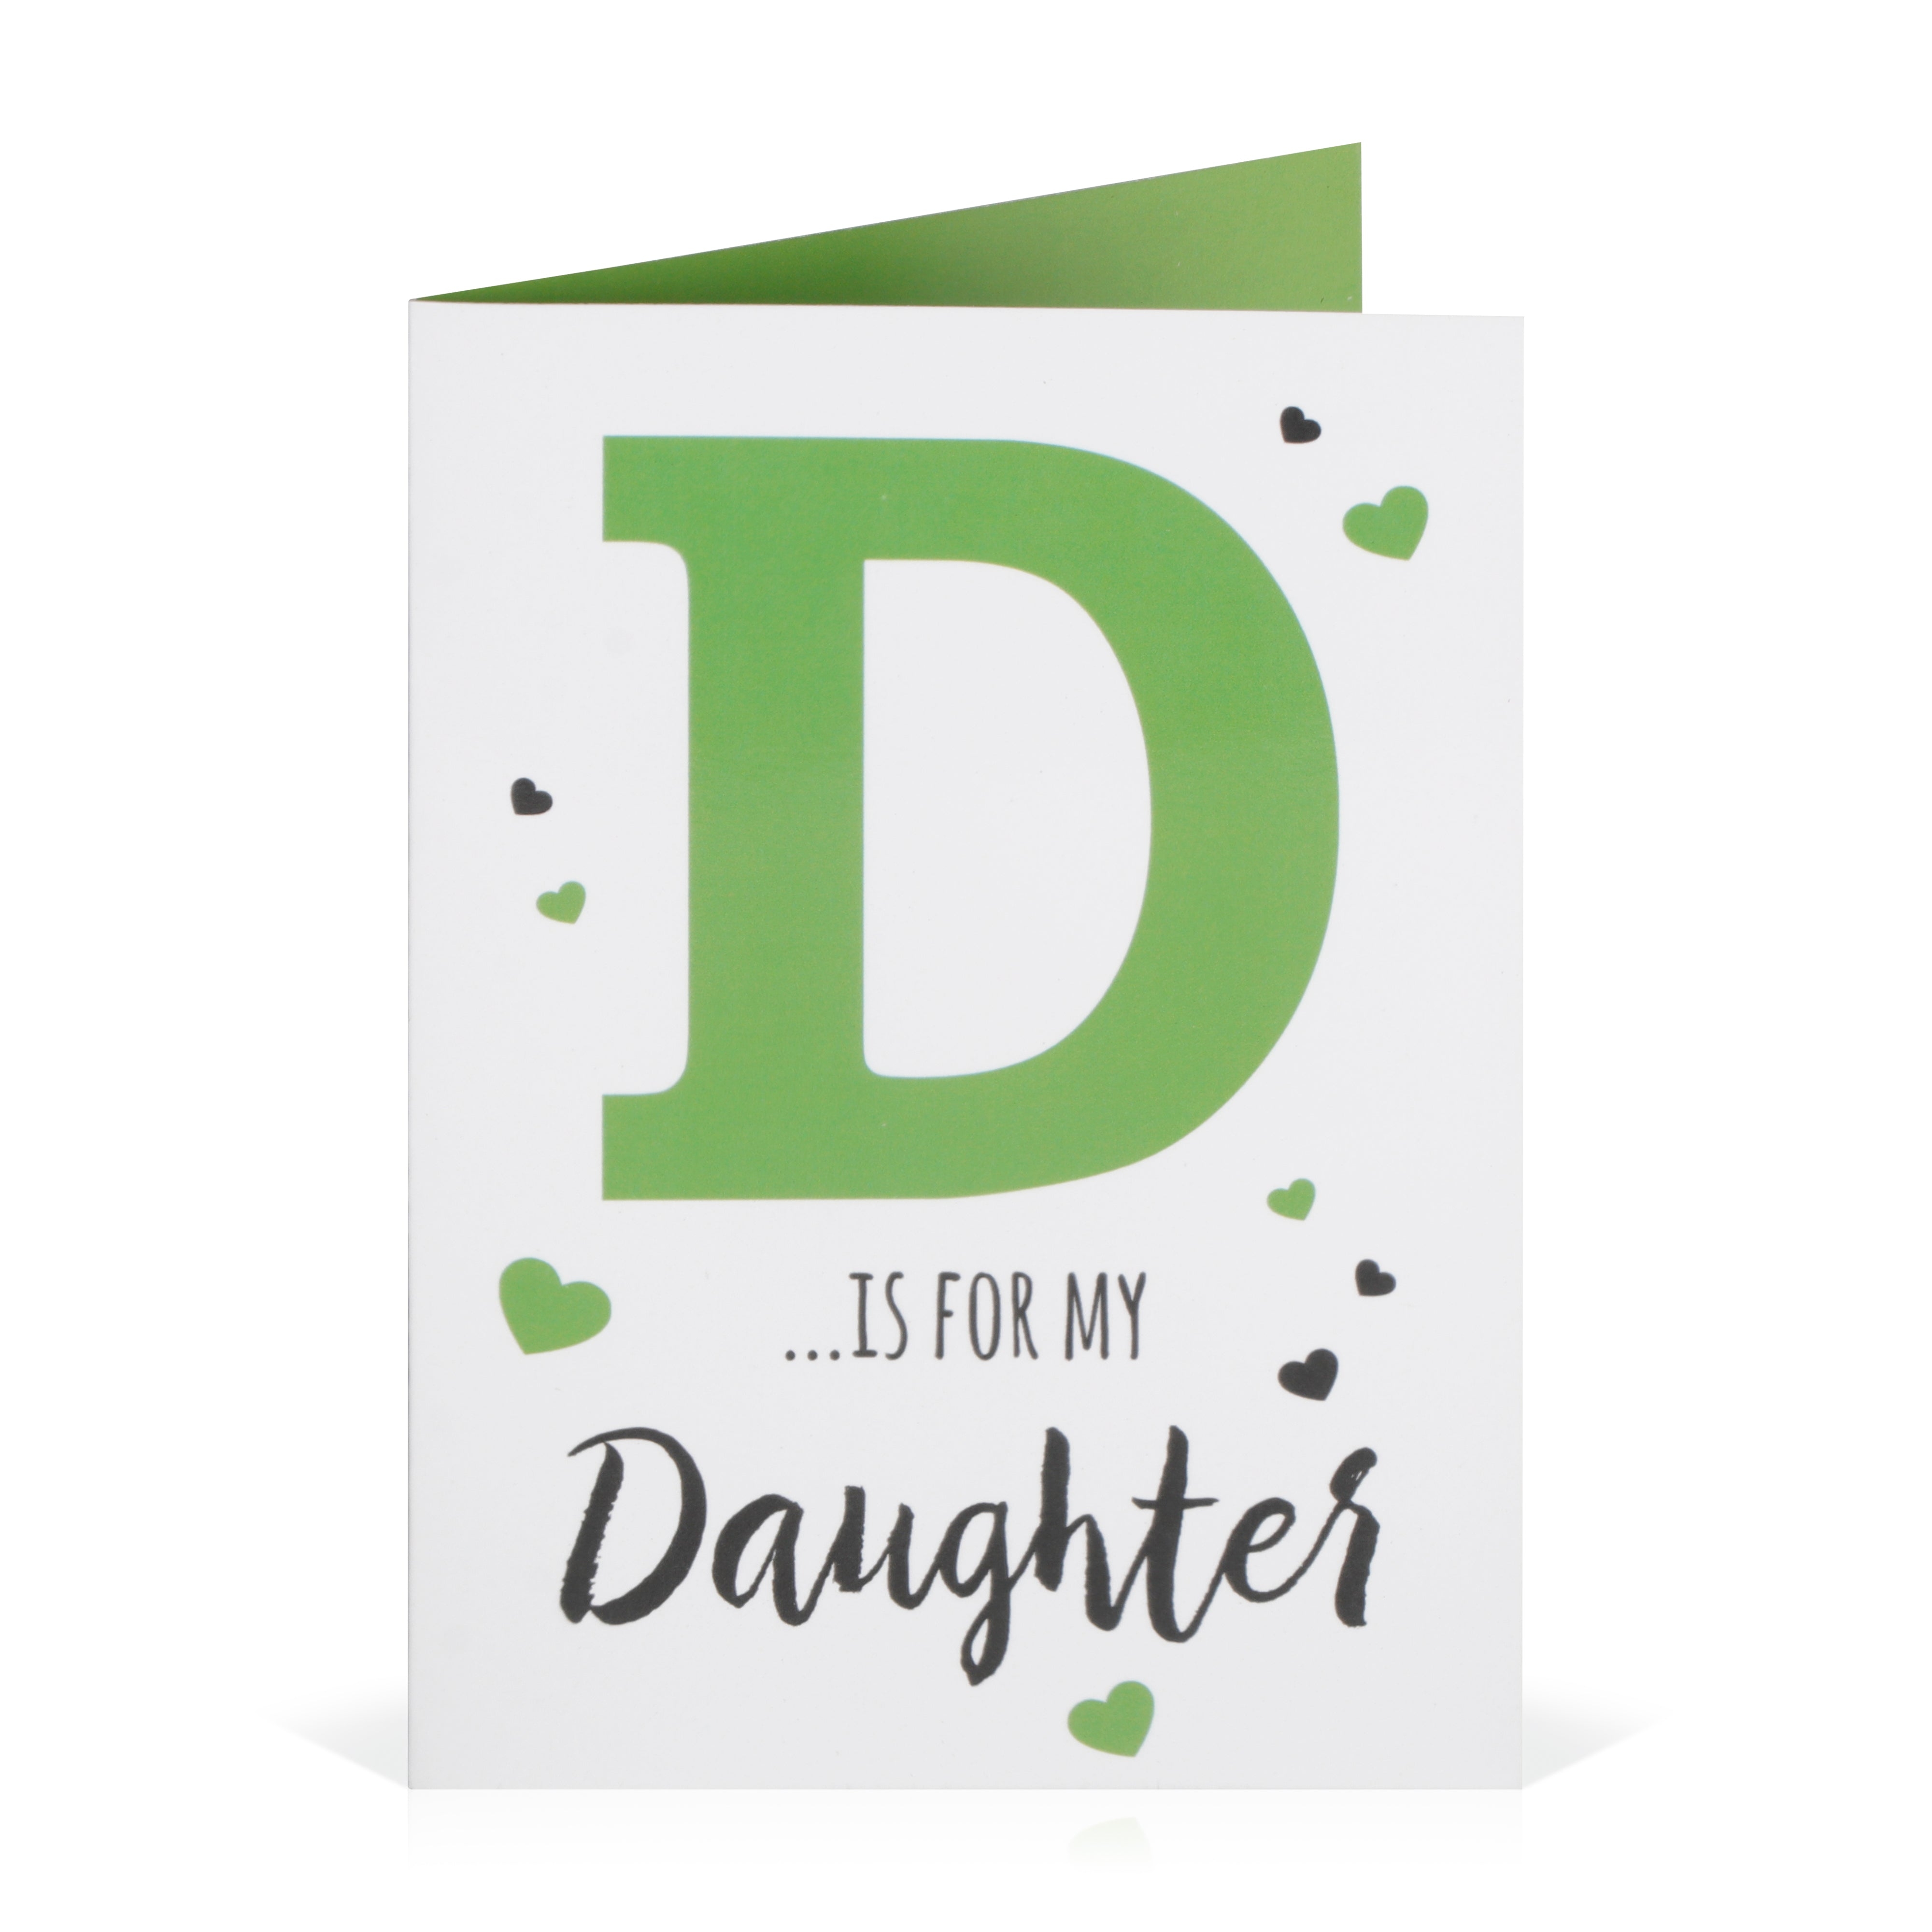 Archies | Archies KEEP SAKE Daughter Gift Combo with Ceramic Mug and Elevated Initial Quotation - with a FREE GREETING CARD 4